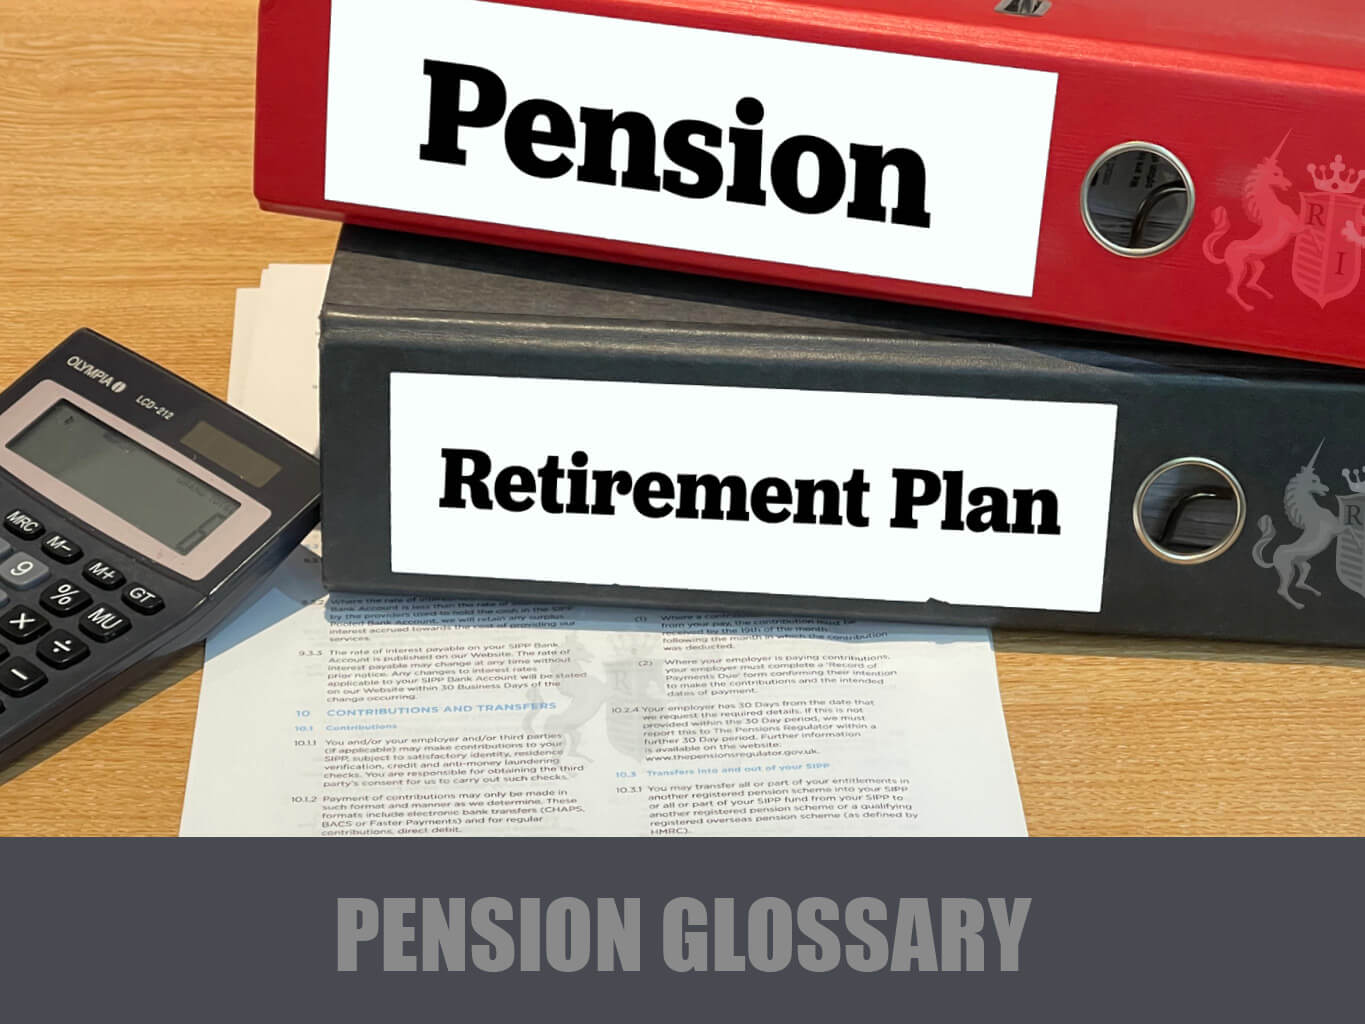 Pension glossary image